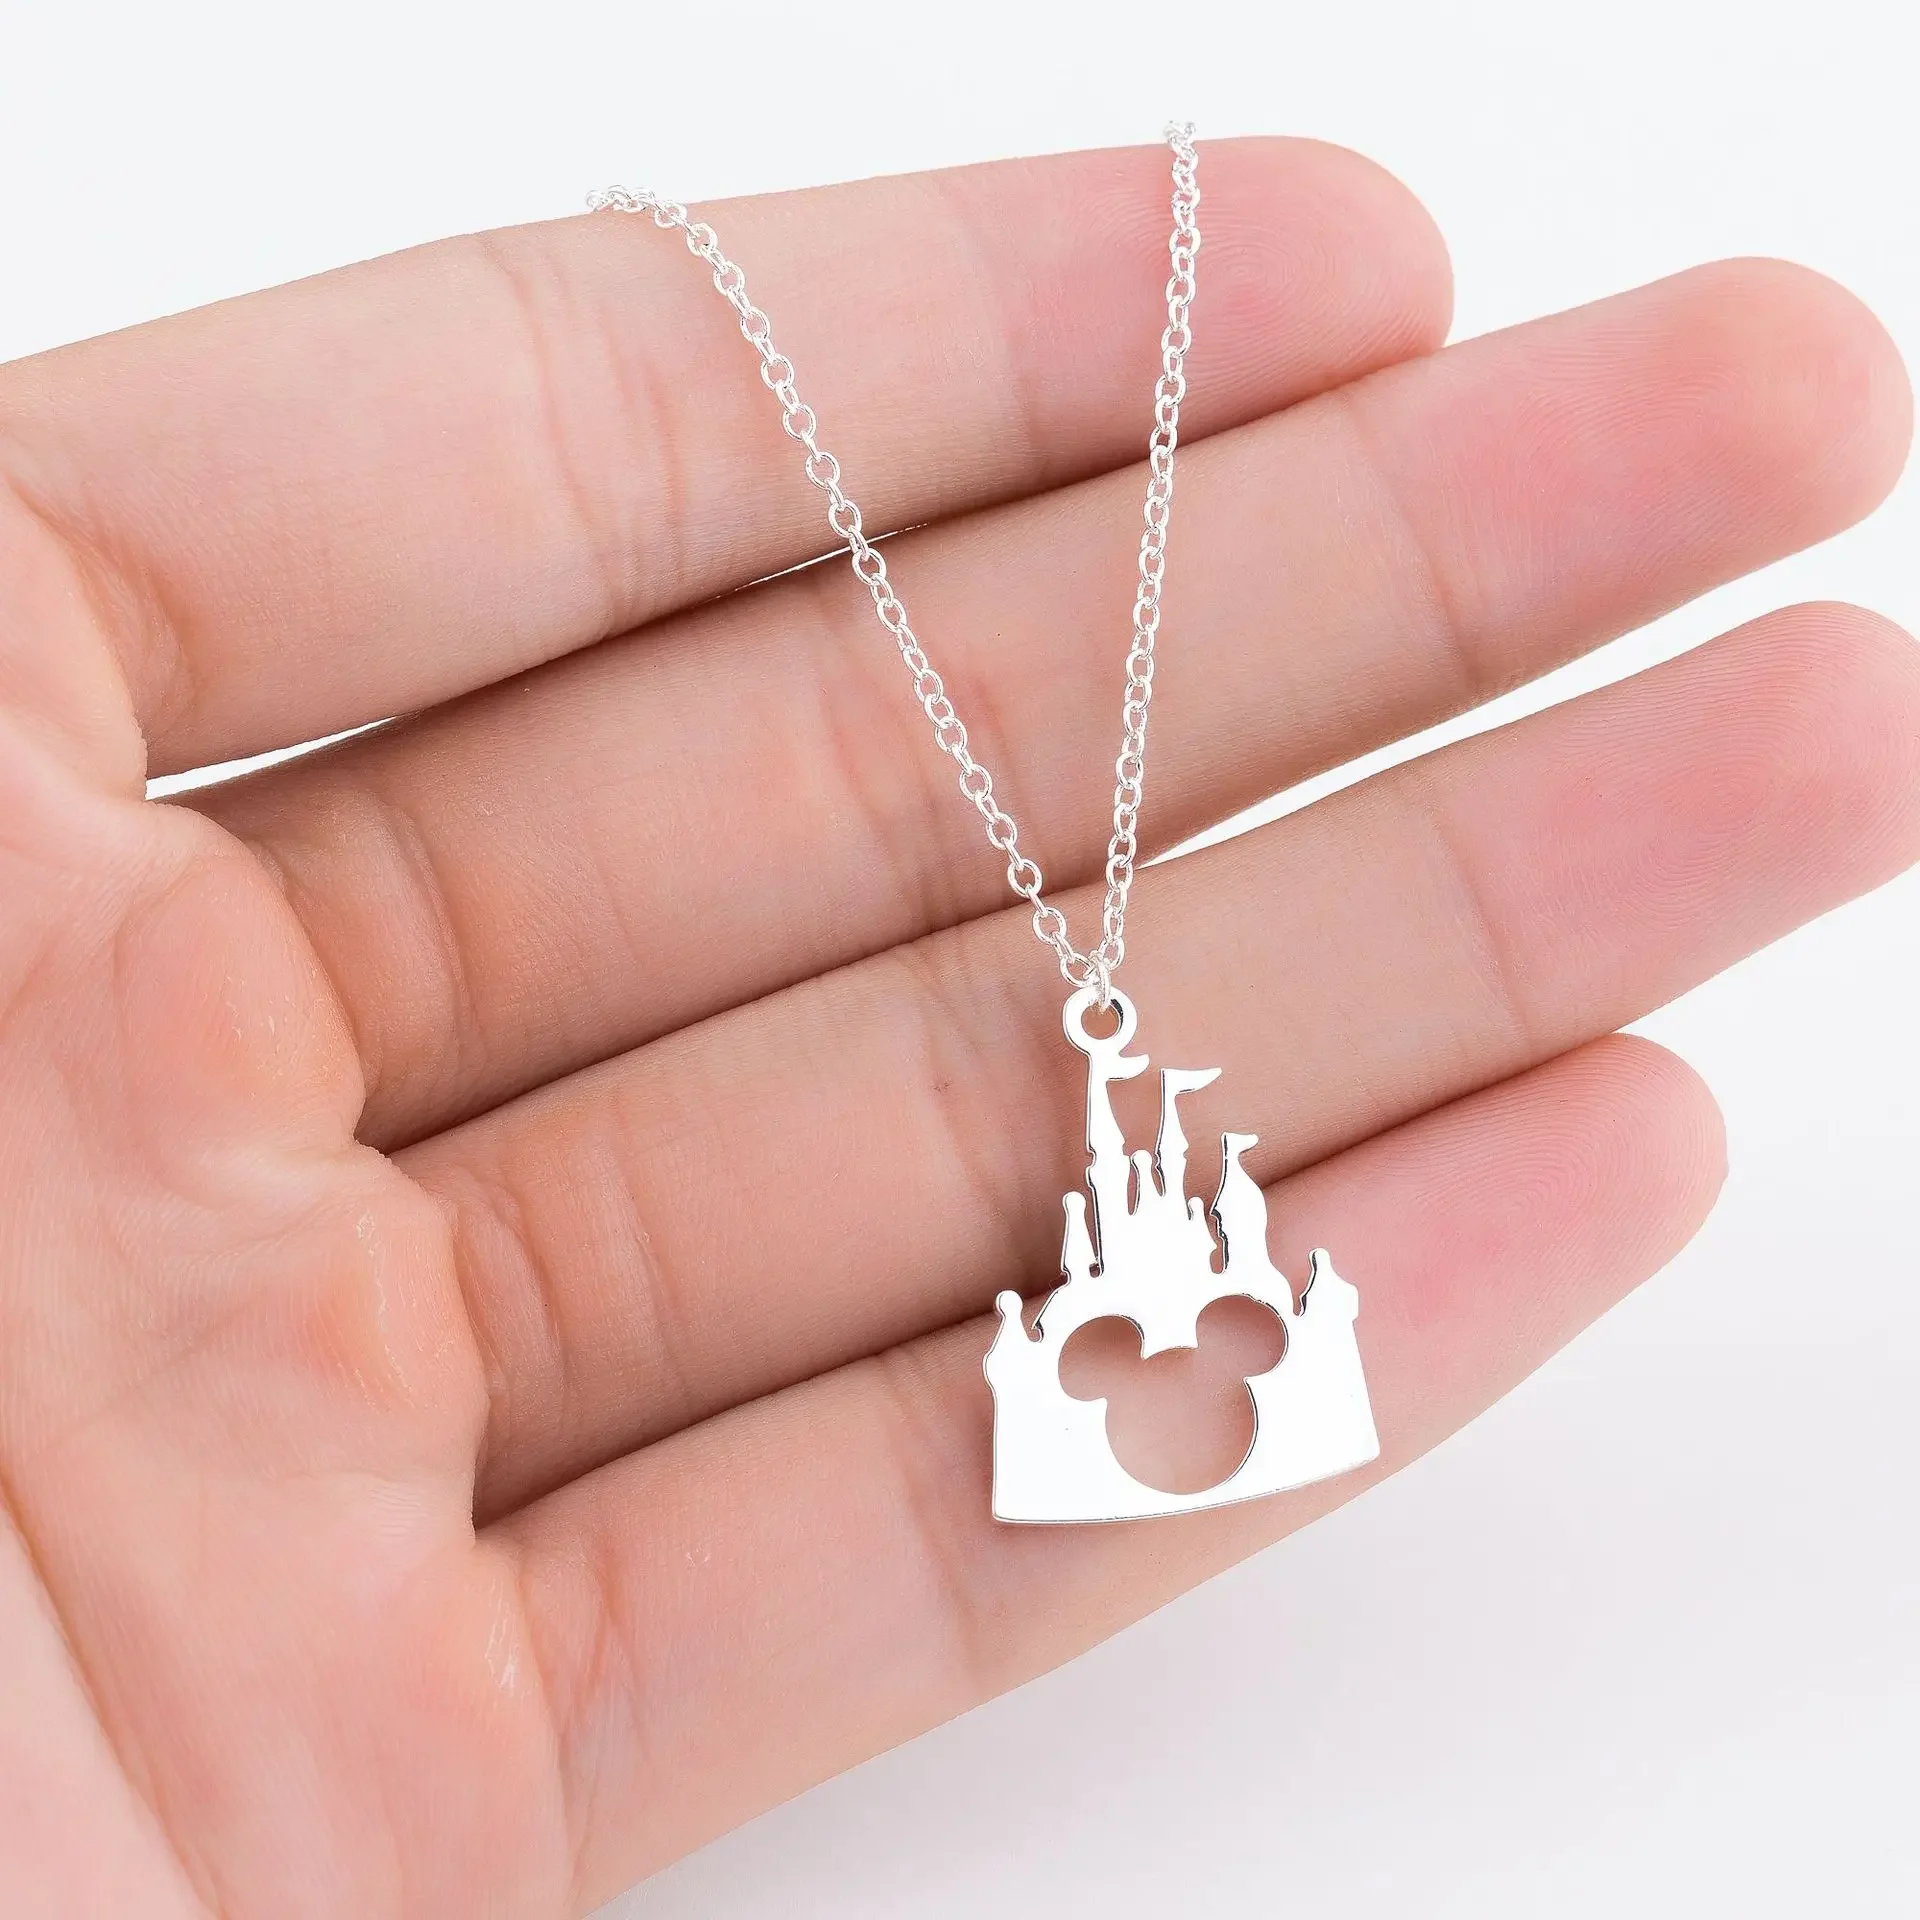 Disney Mickey Mouse Cartoon Castle Mickey Head Pendant Necklace Castle Animal Jewelry for Women Necklaces Fashion Accessories